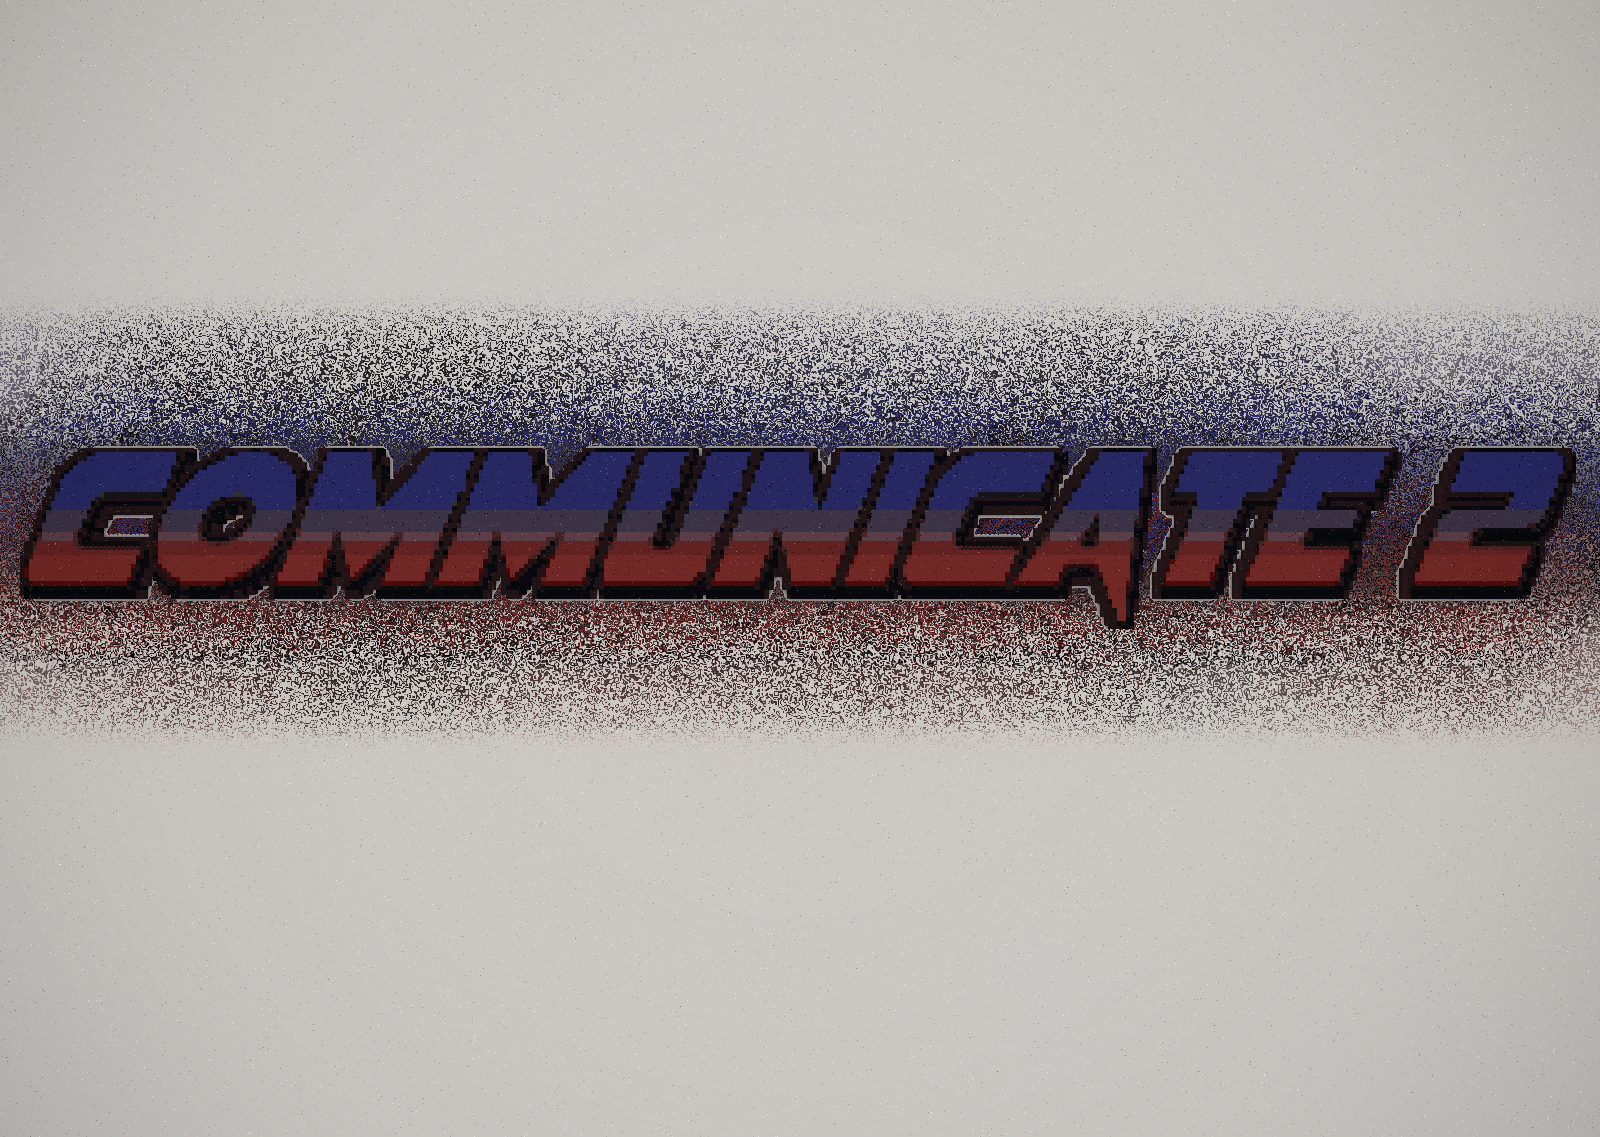 Download Communicate 2 for Minecraft 1.14.4